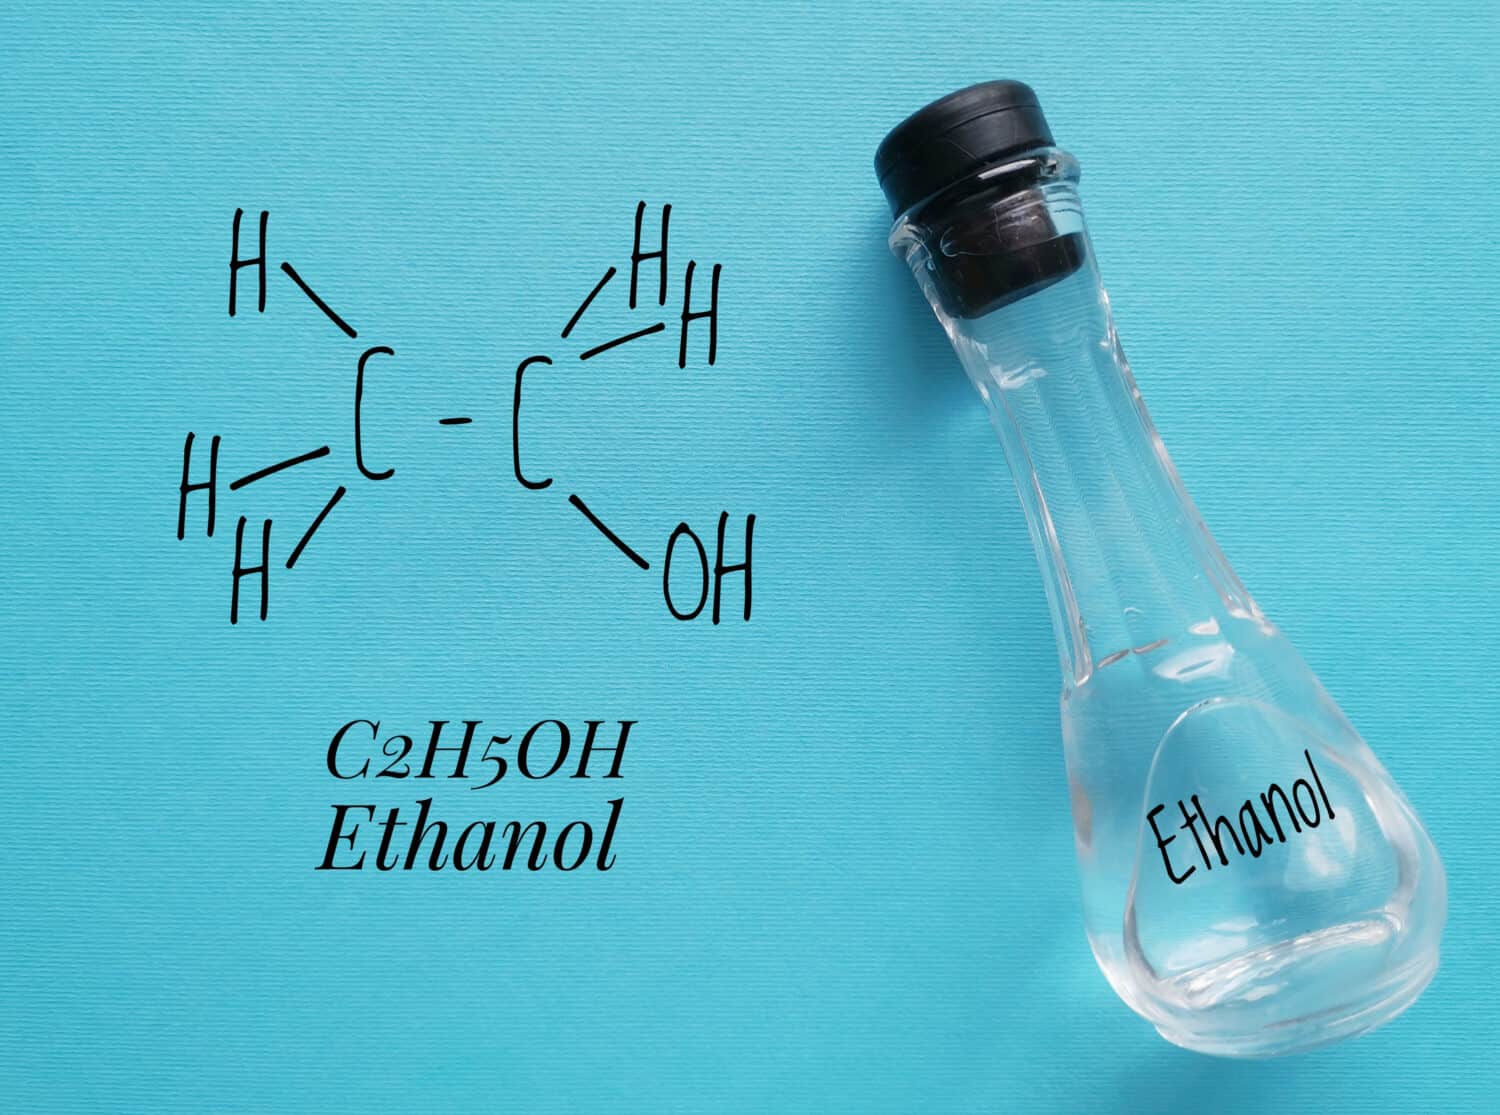 Structural chemical formula of ethanol molecule with a glass bottle of ethanol. Ethanol (ethyl alcohol) is a chemical compound, a simple alcohol with the chemical formula C2H6O.